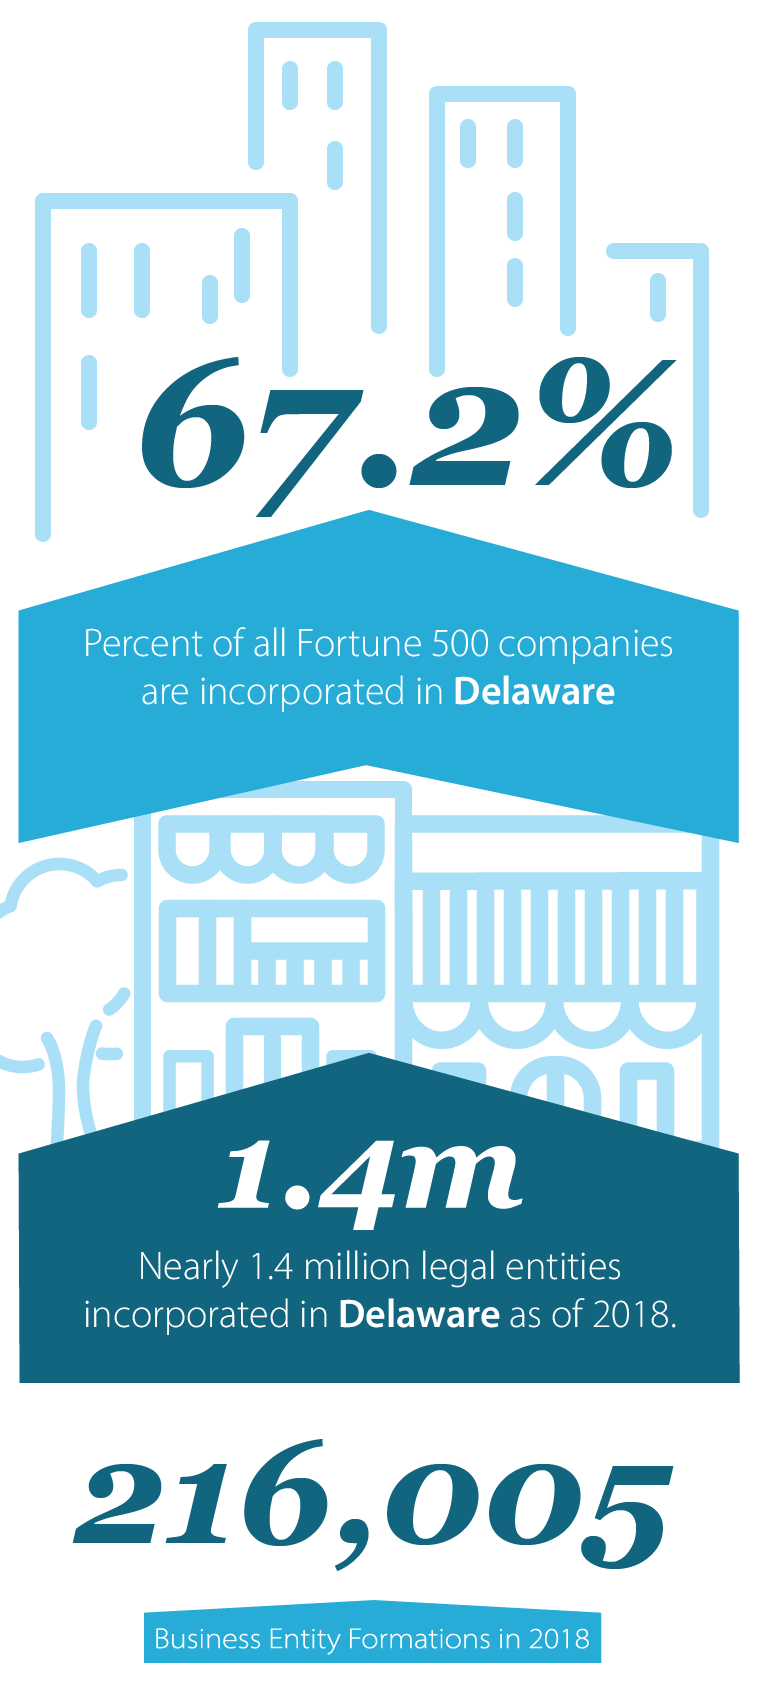 Image representing 66.8 percent of all Fortune 500 companies are incorpated in Delaware and more than 1.3 million legal entities are incorporated in Delaware.